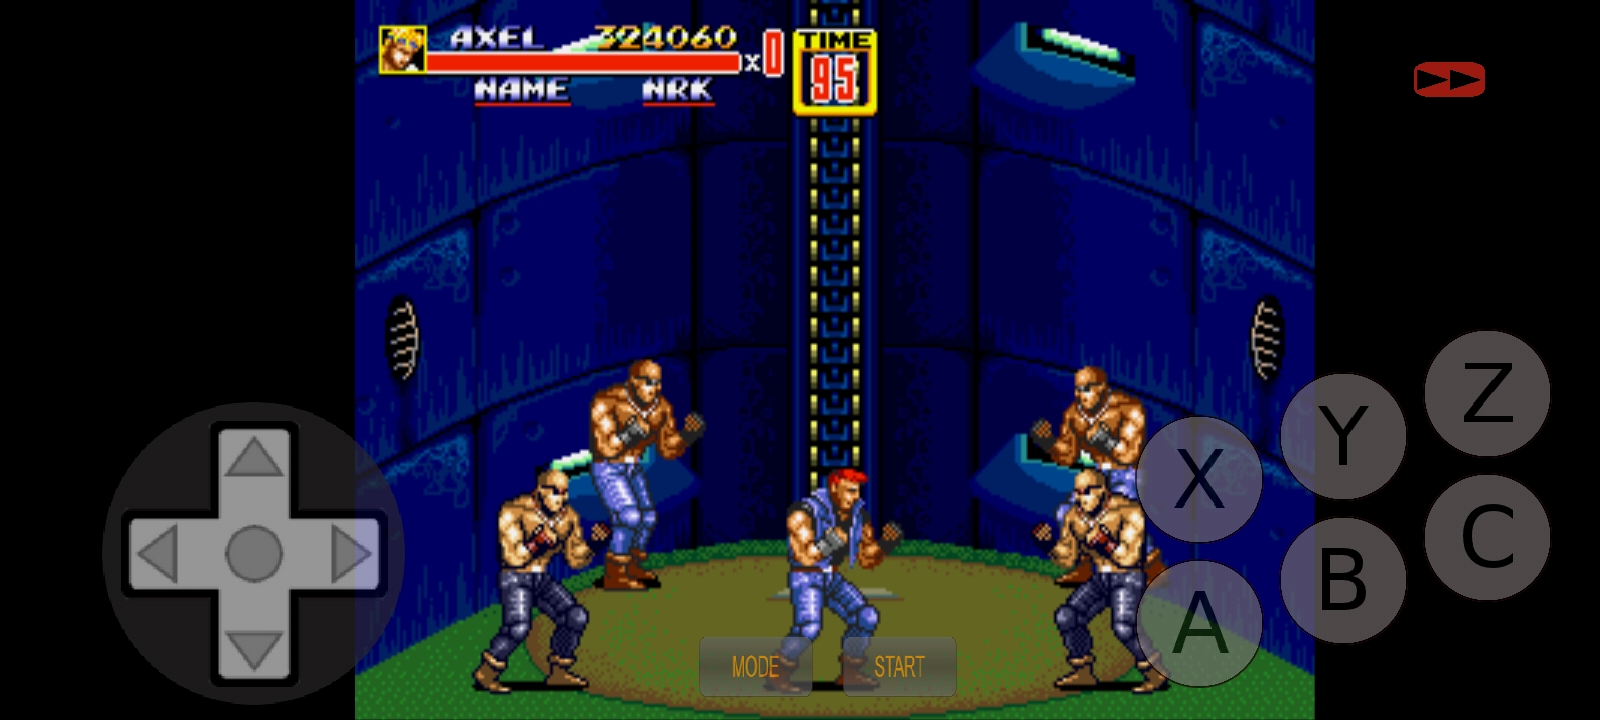 Streets of Rage 2: Hard 324,060 points